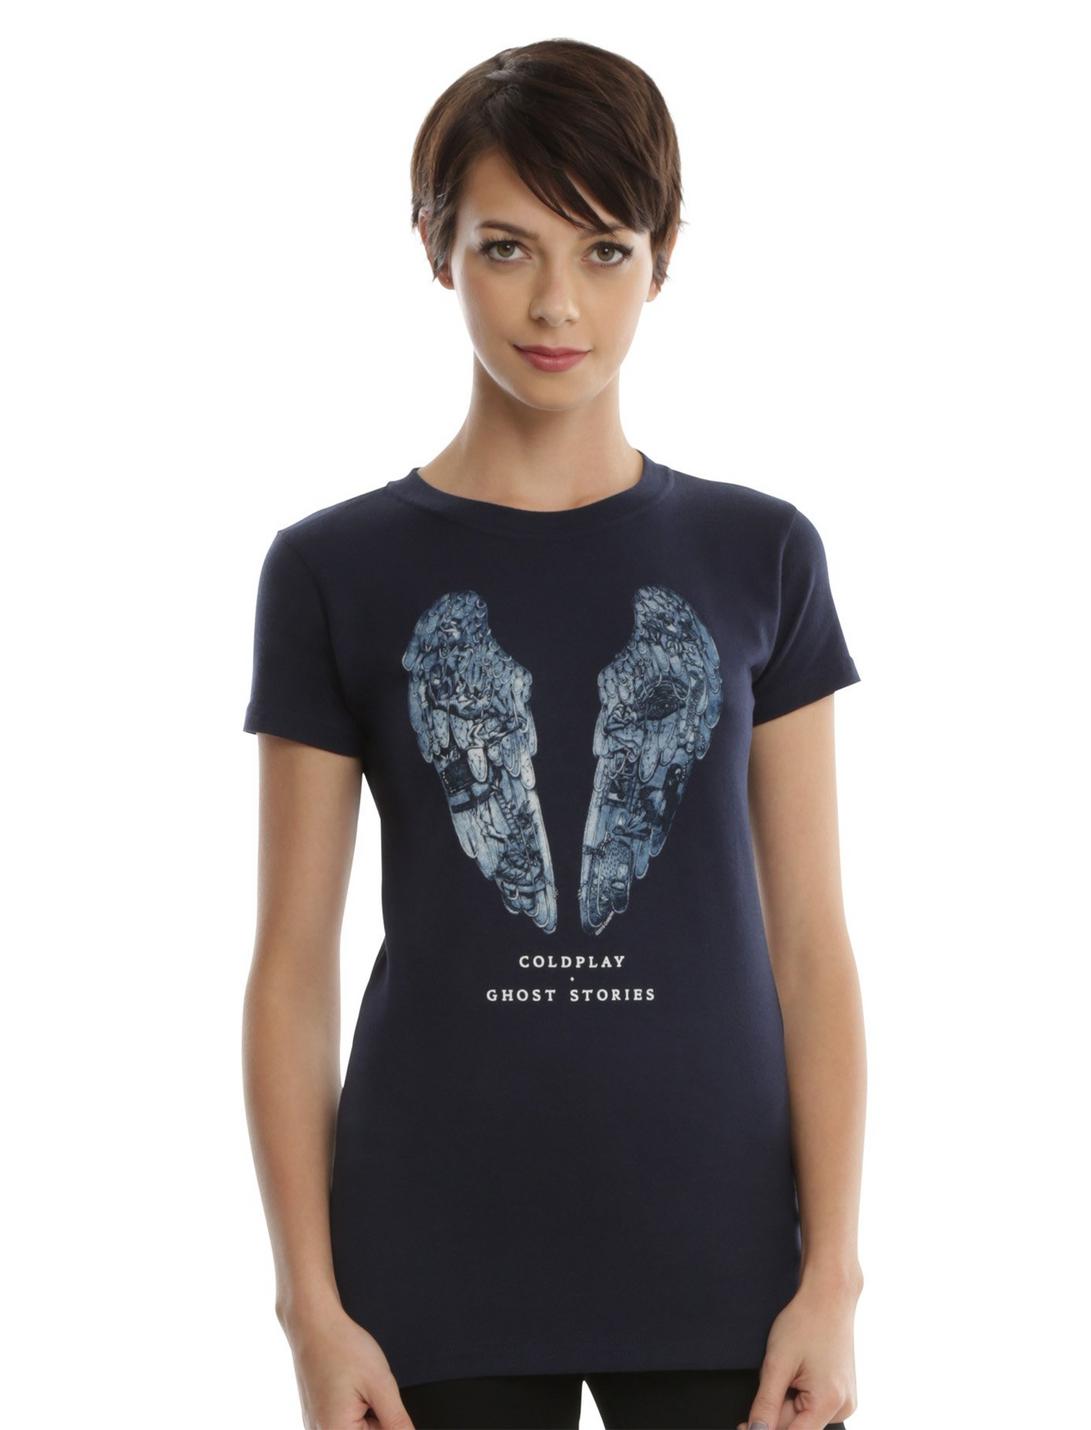 Coldplay Ghost Stories Cover Girls T-Shirt, NAVY, hi-res